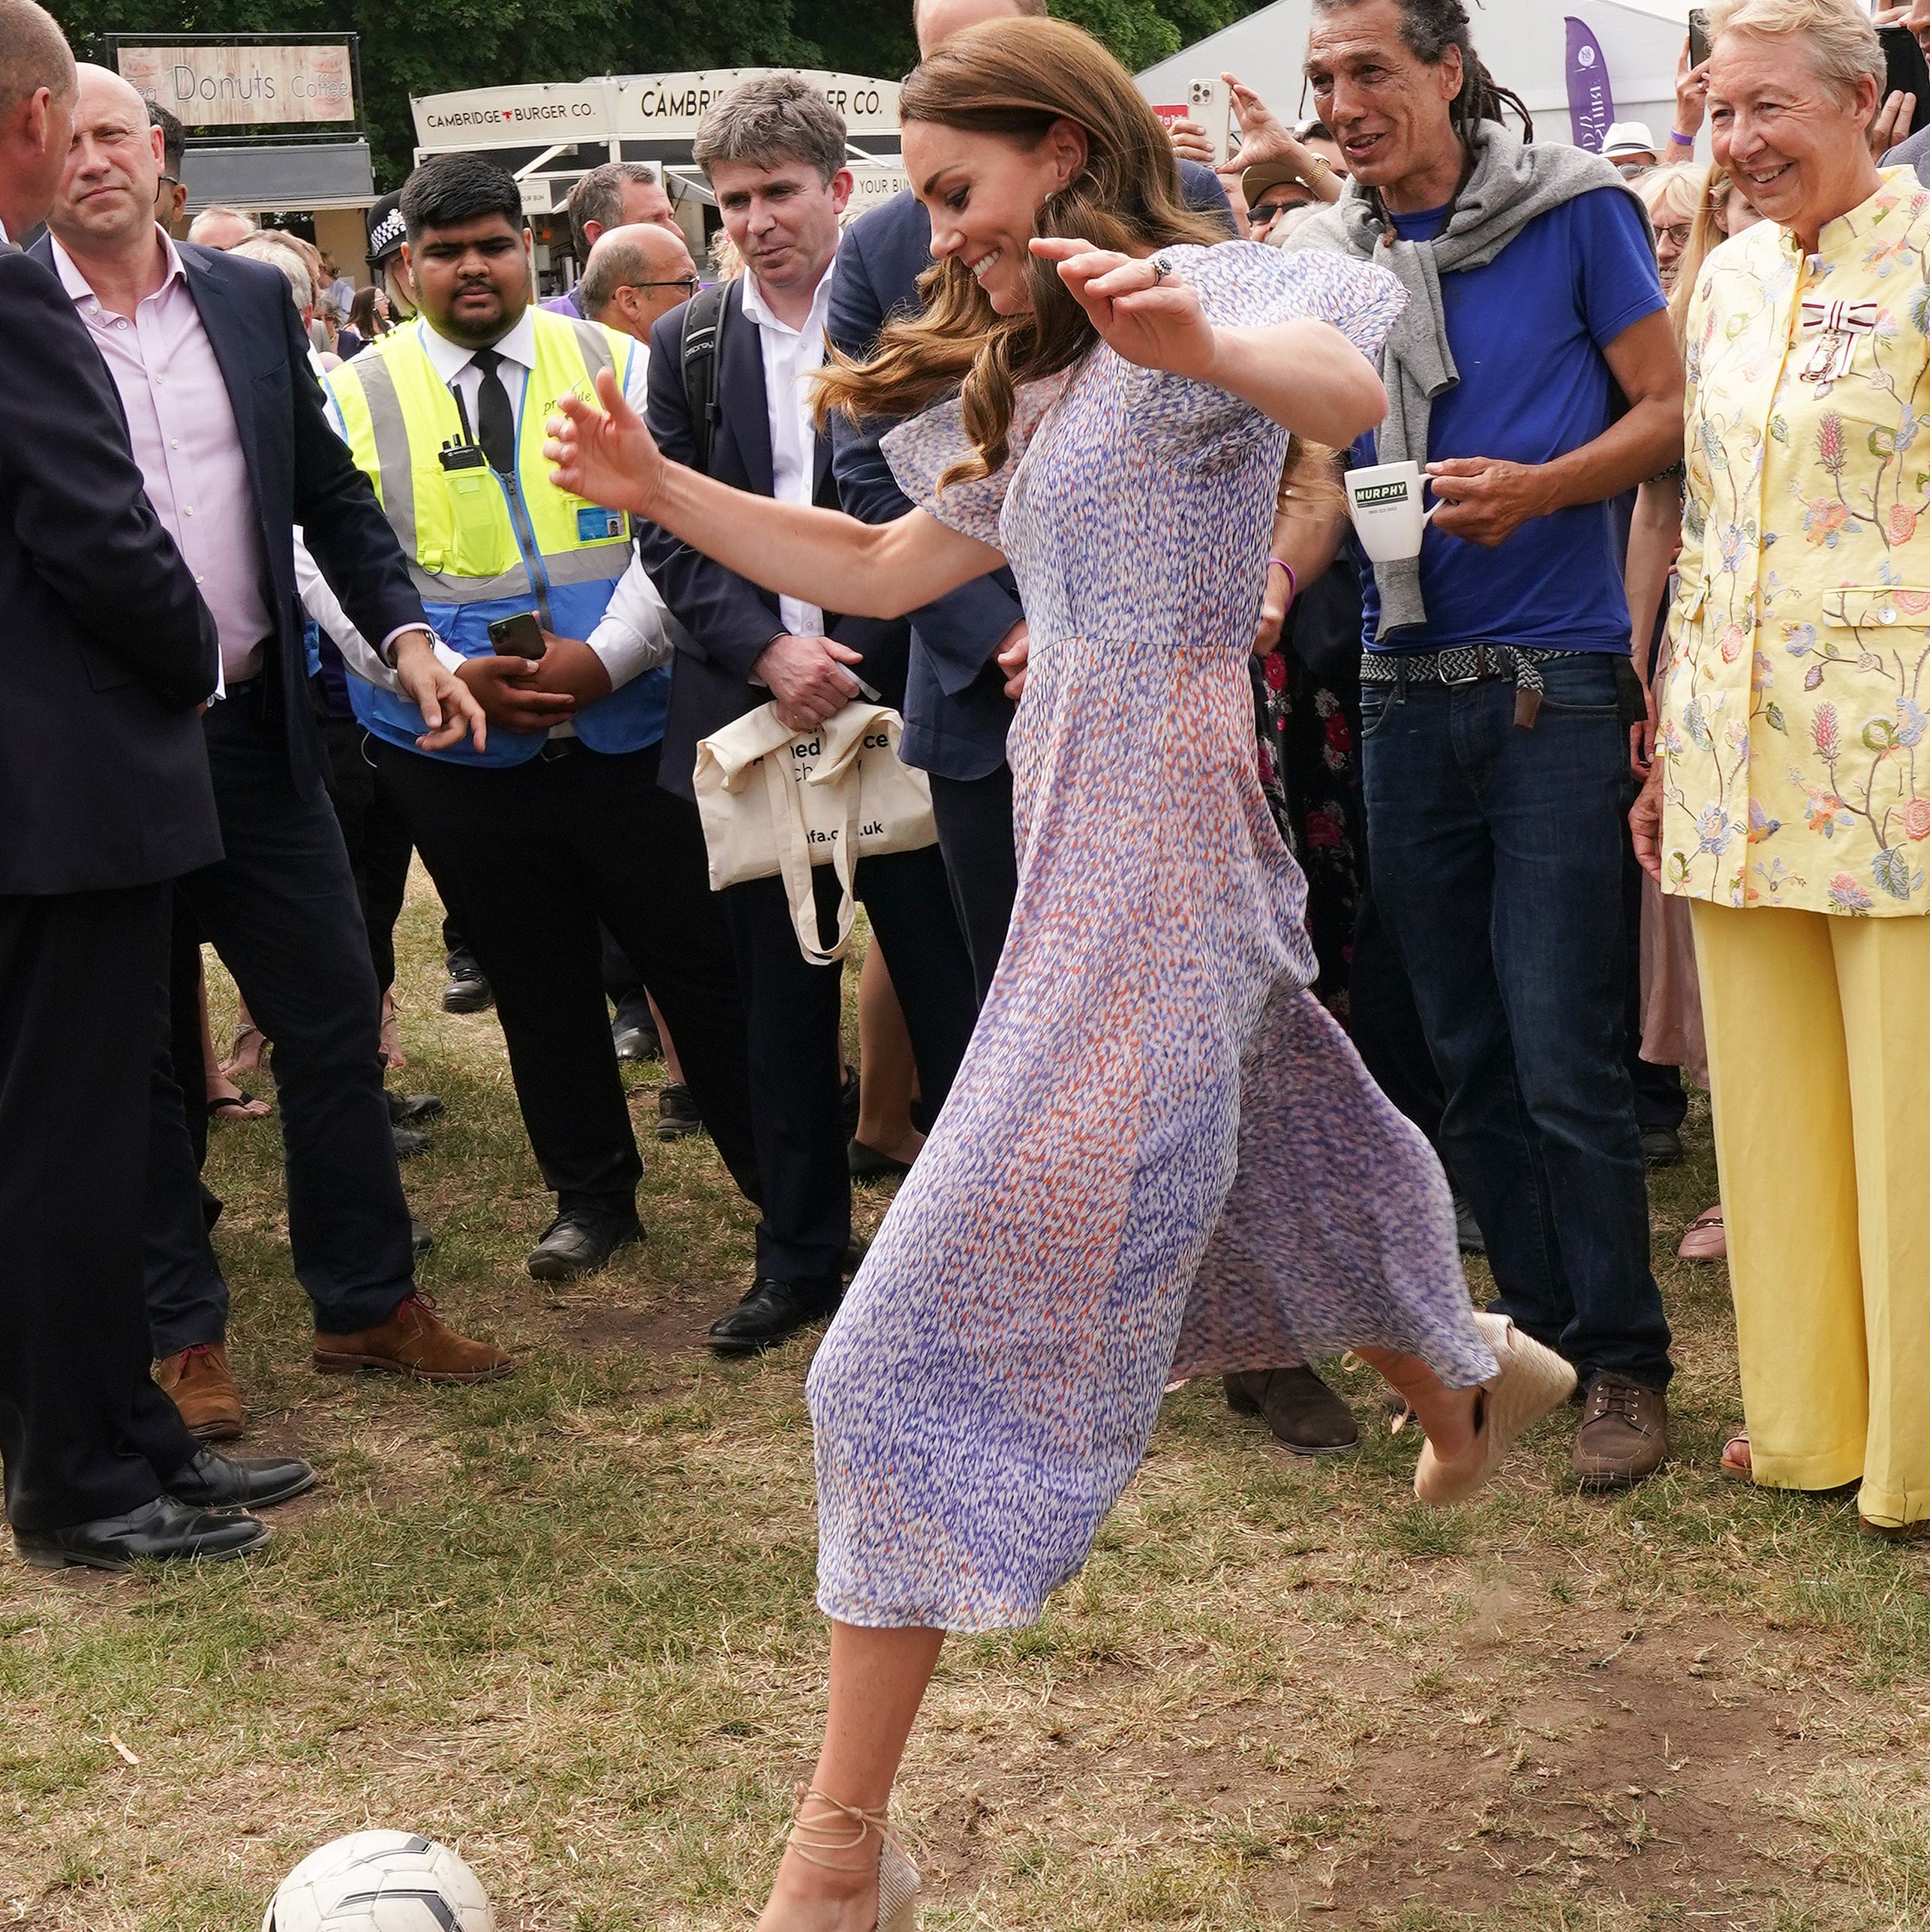 Here's Kate Middleton Kicking a Soccer Ball in Heels Like a Pro